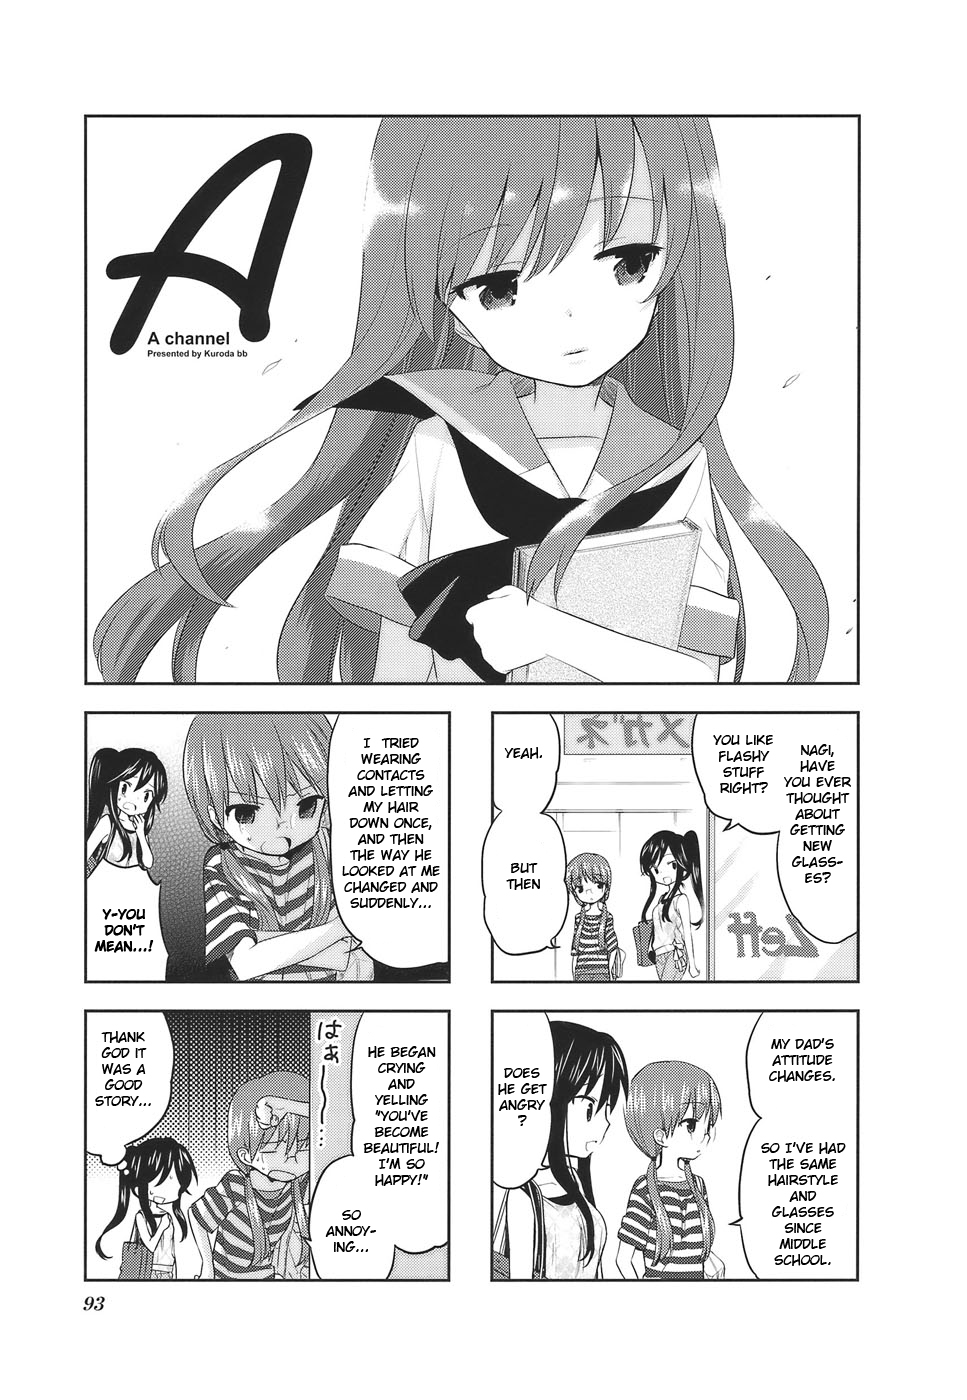 A-Channel Vol.1 Ch.14